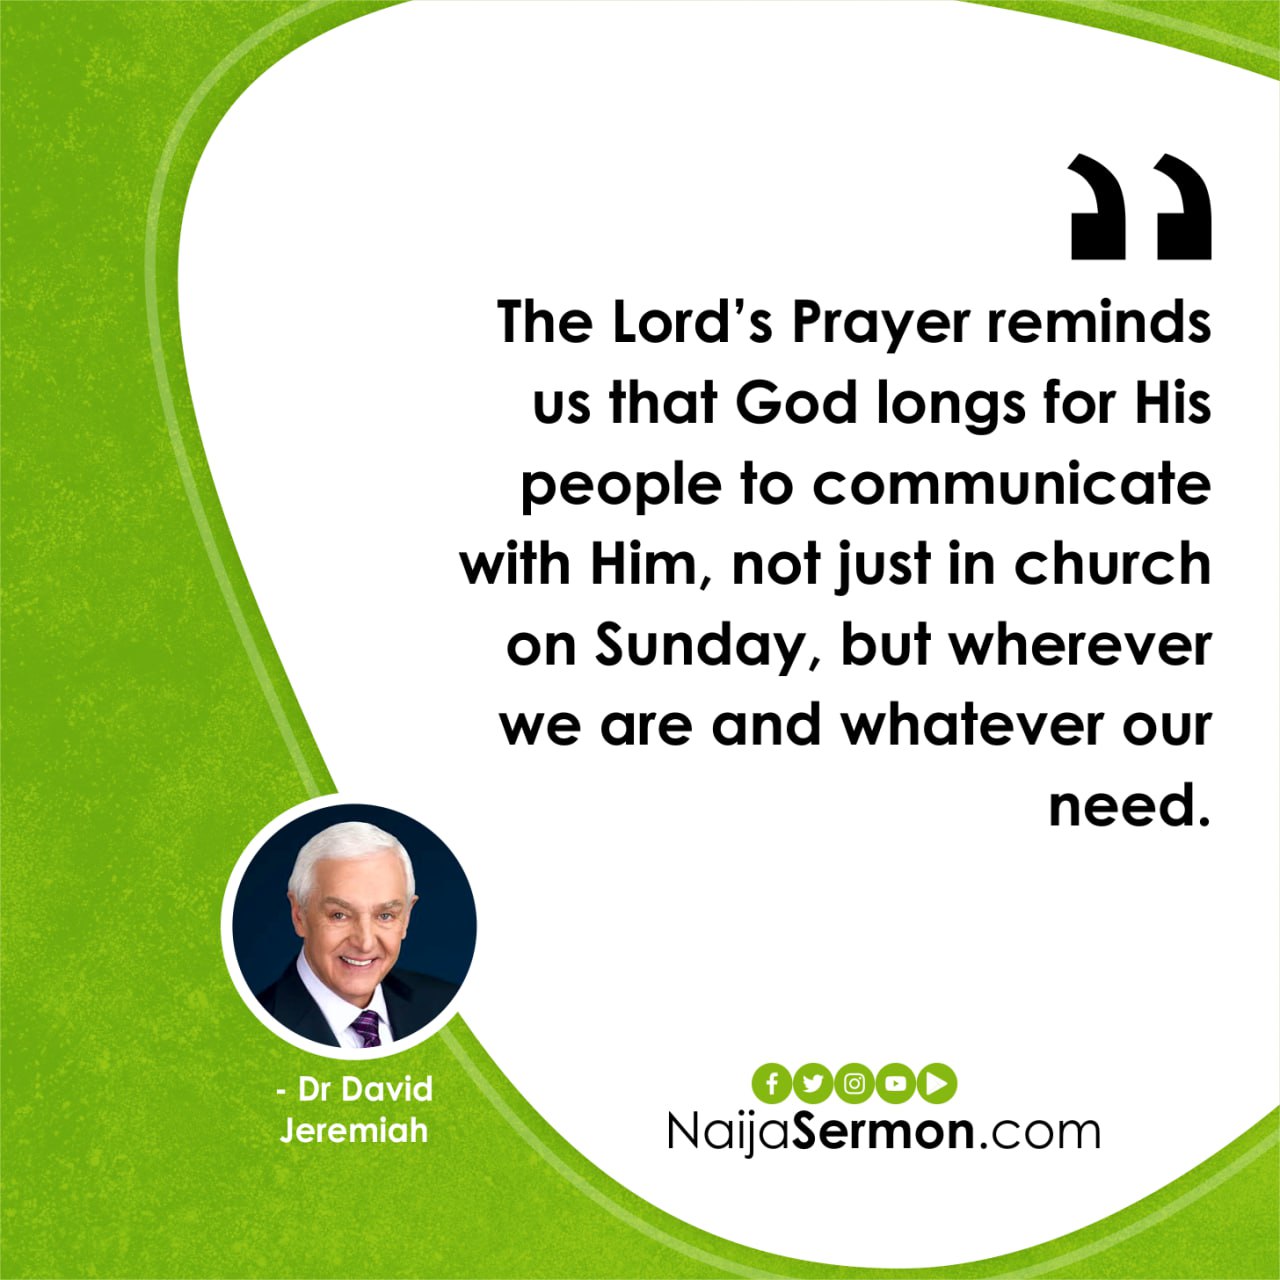 QUOTTE OF THE DAY BY DR. DAVID JEREMIAH 3